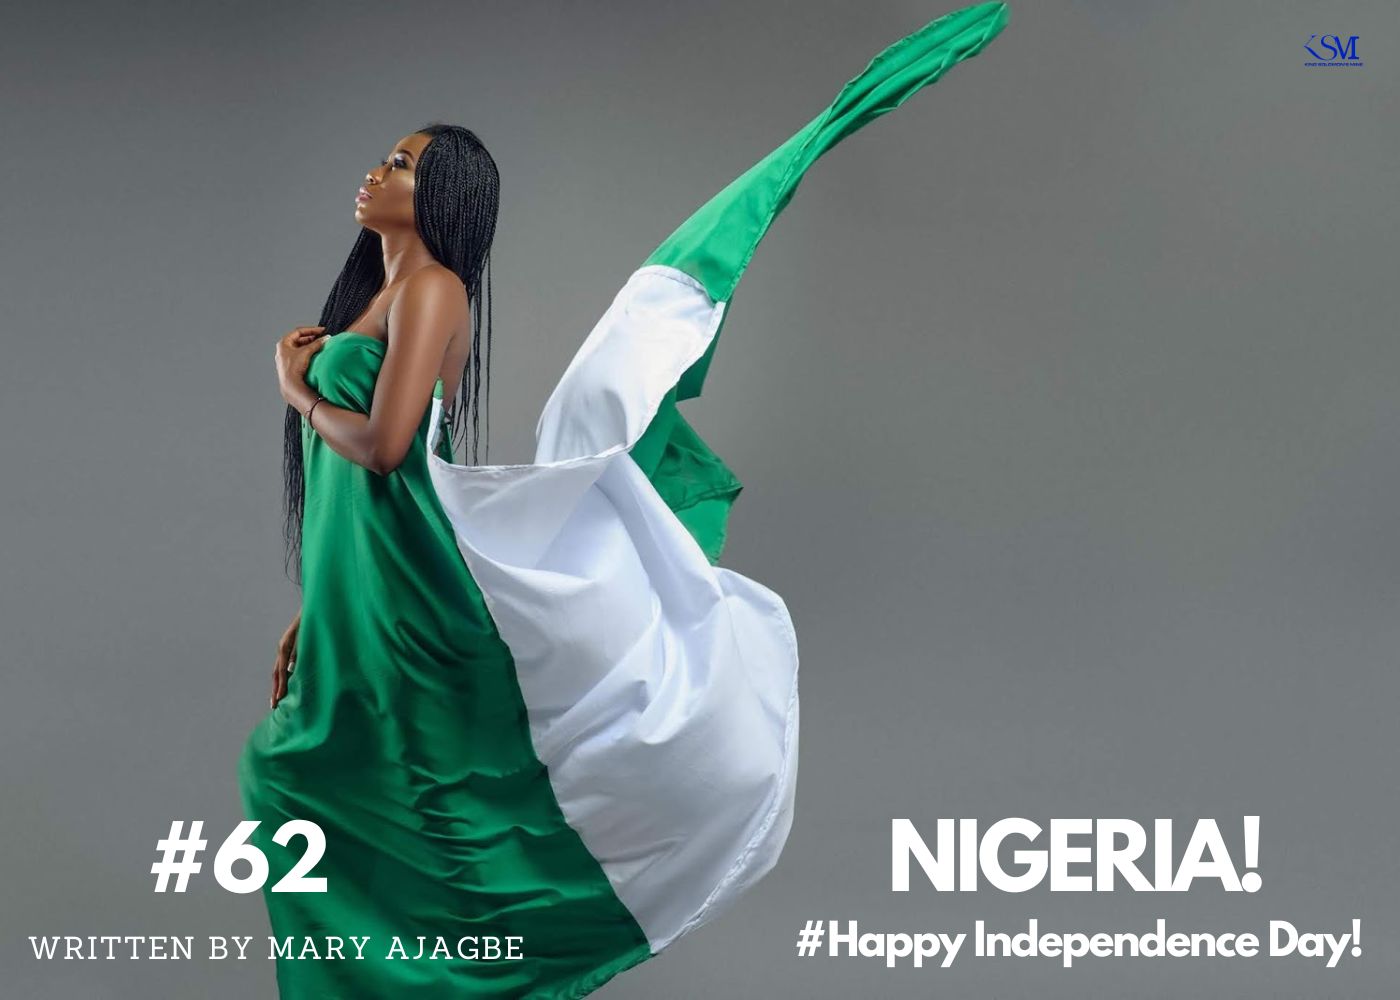 Nigeria! Happy Independence Day!